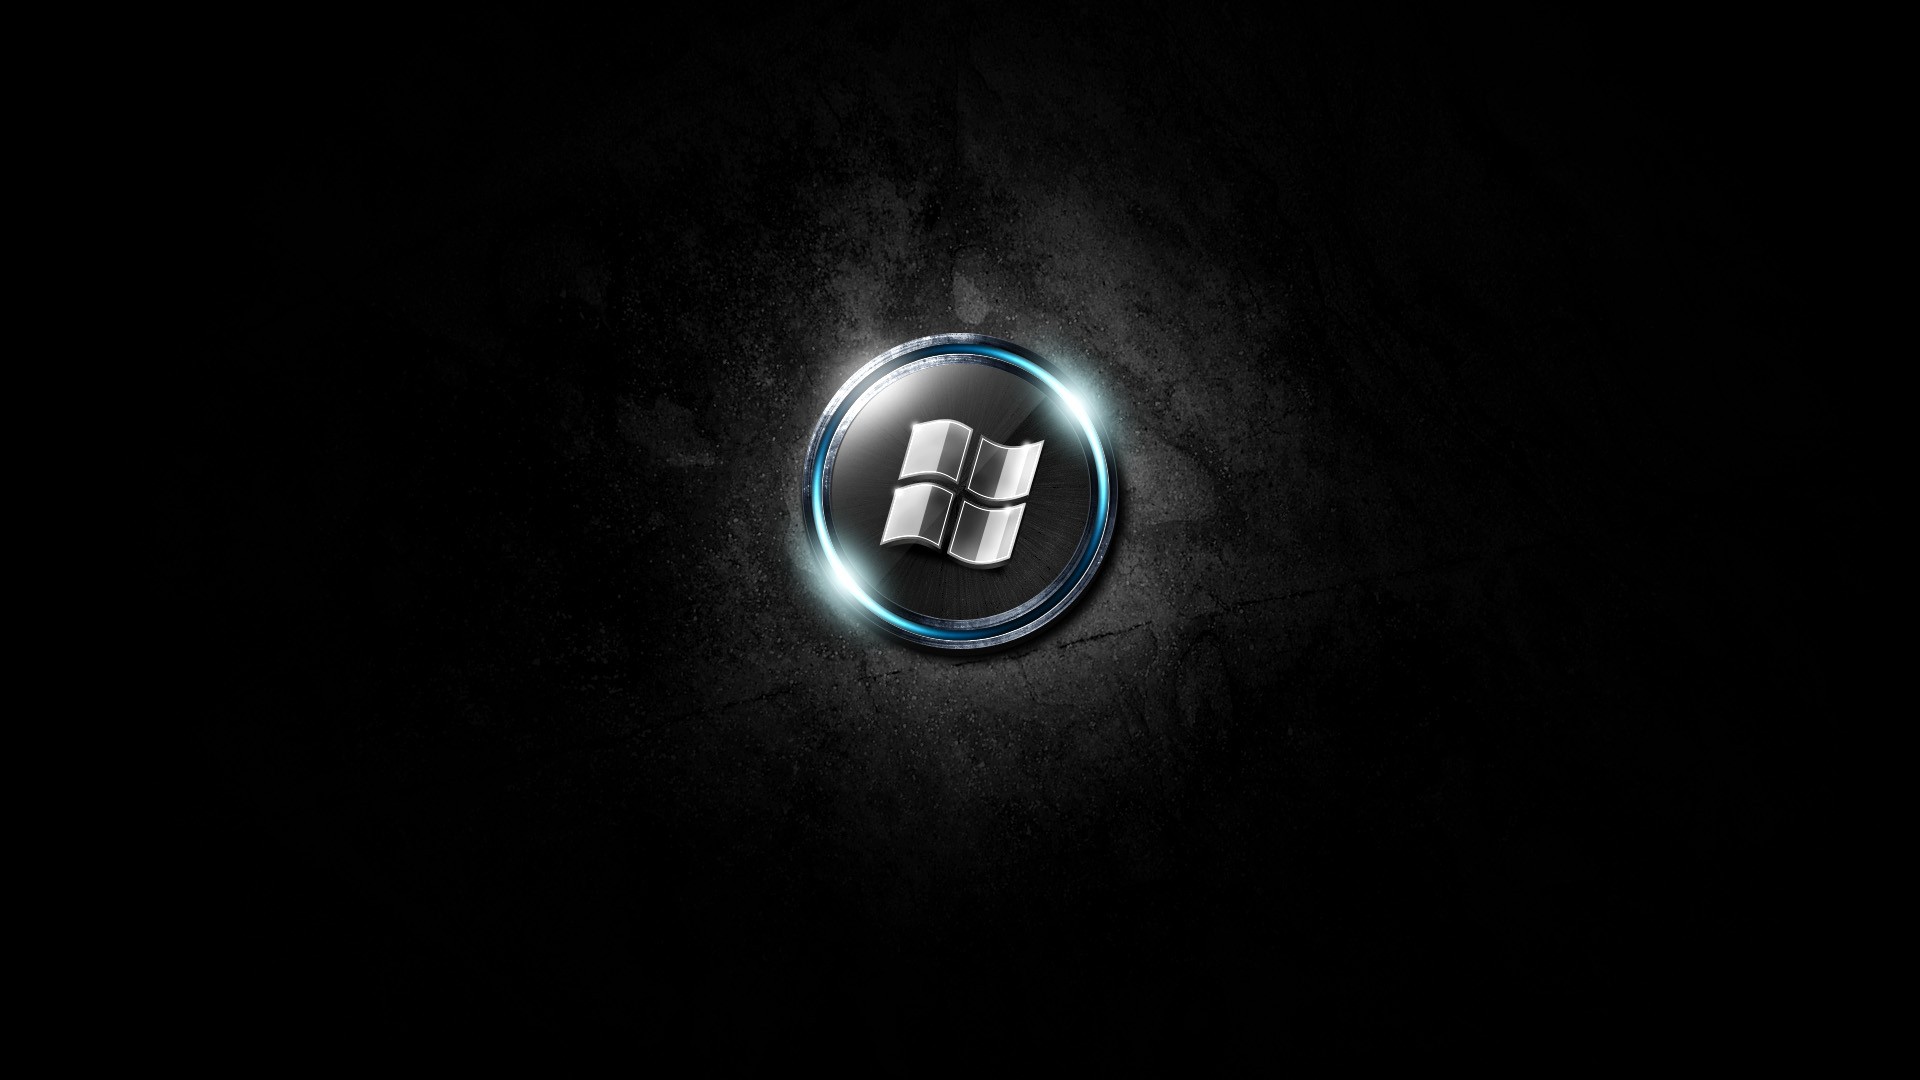 Windows 7 Full HD Wallpaper and Background Image ...